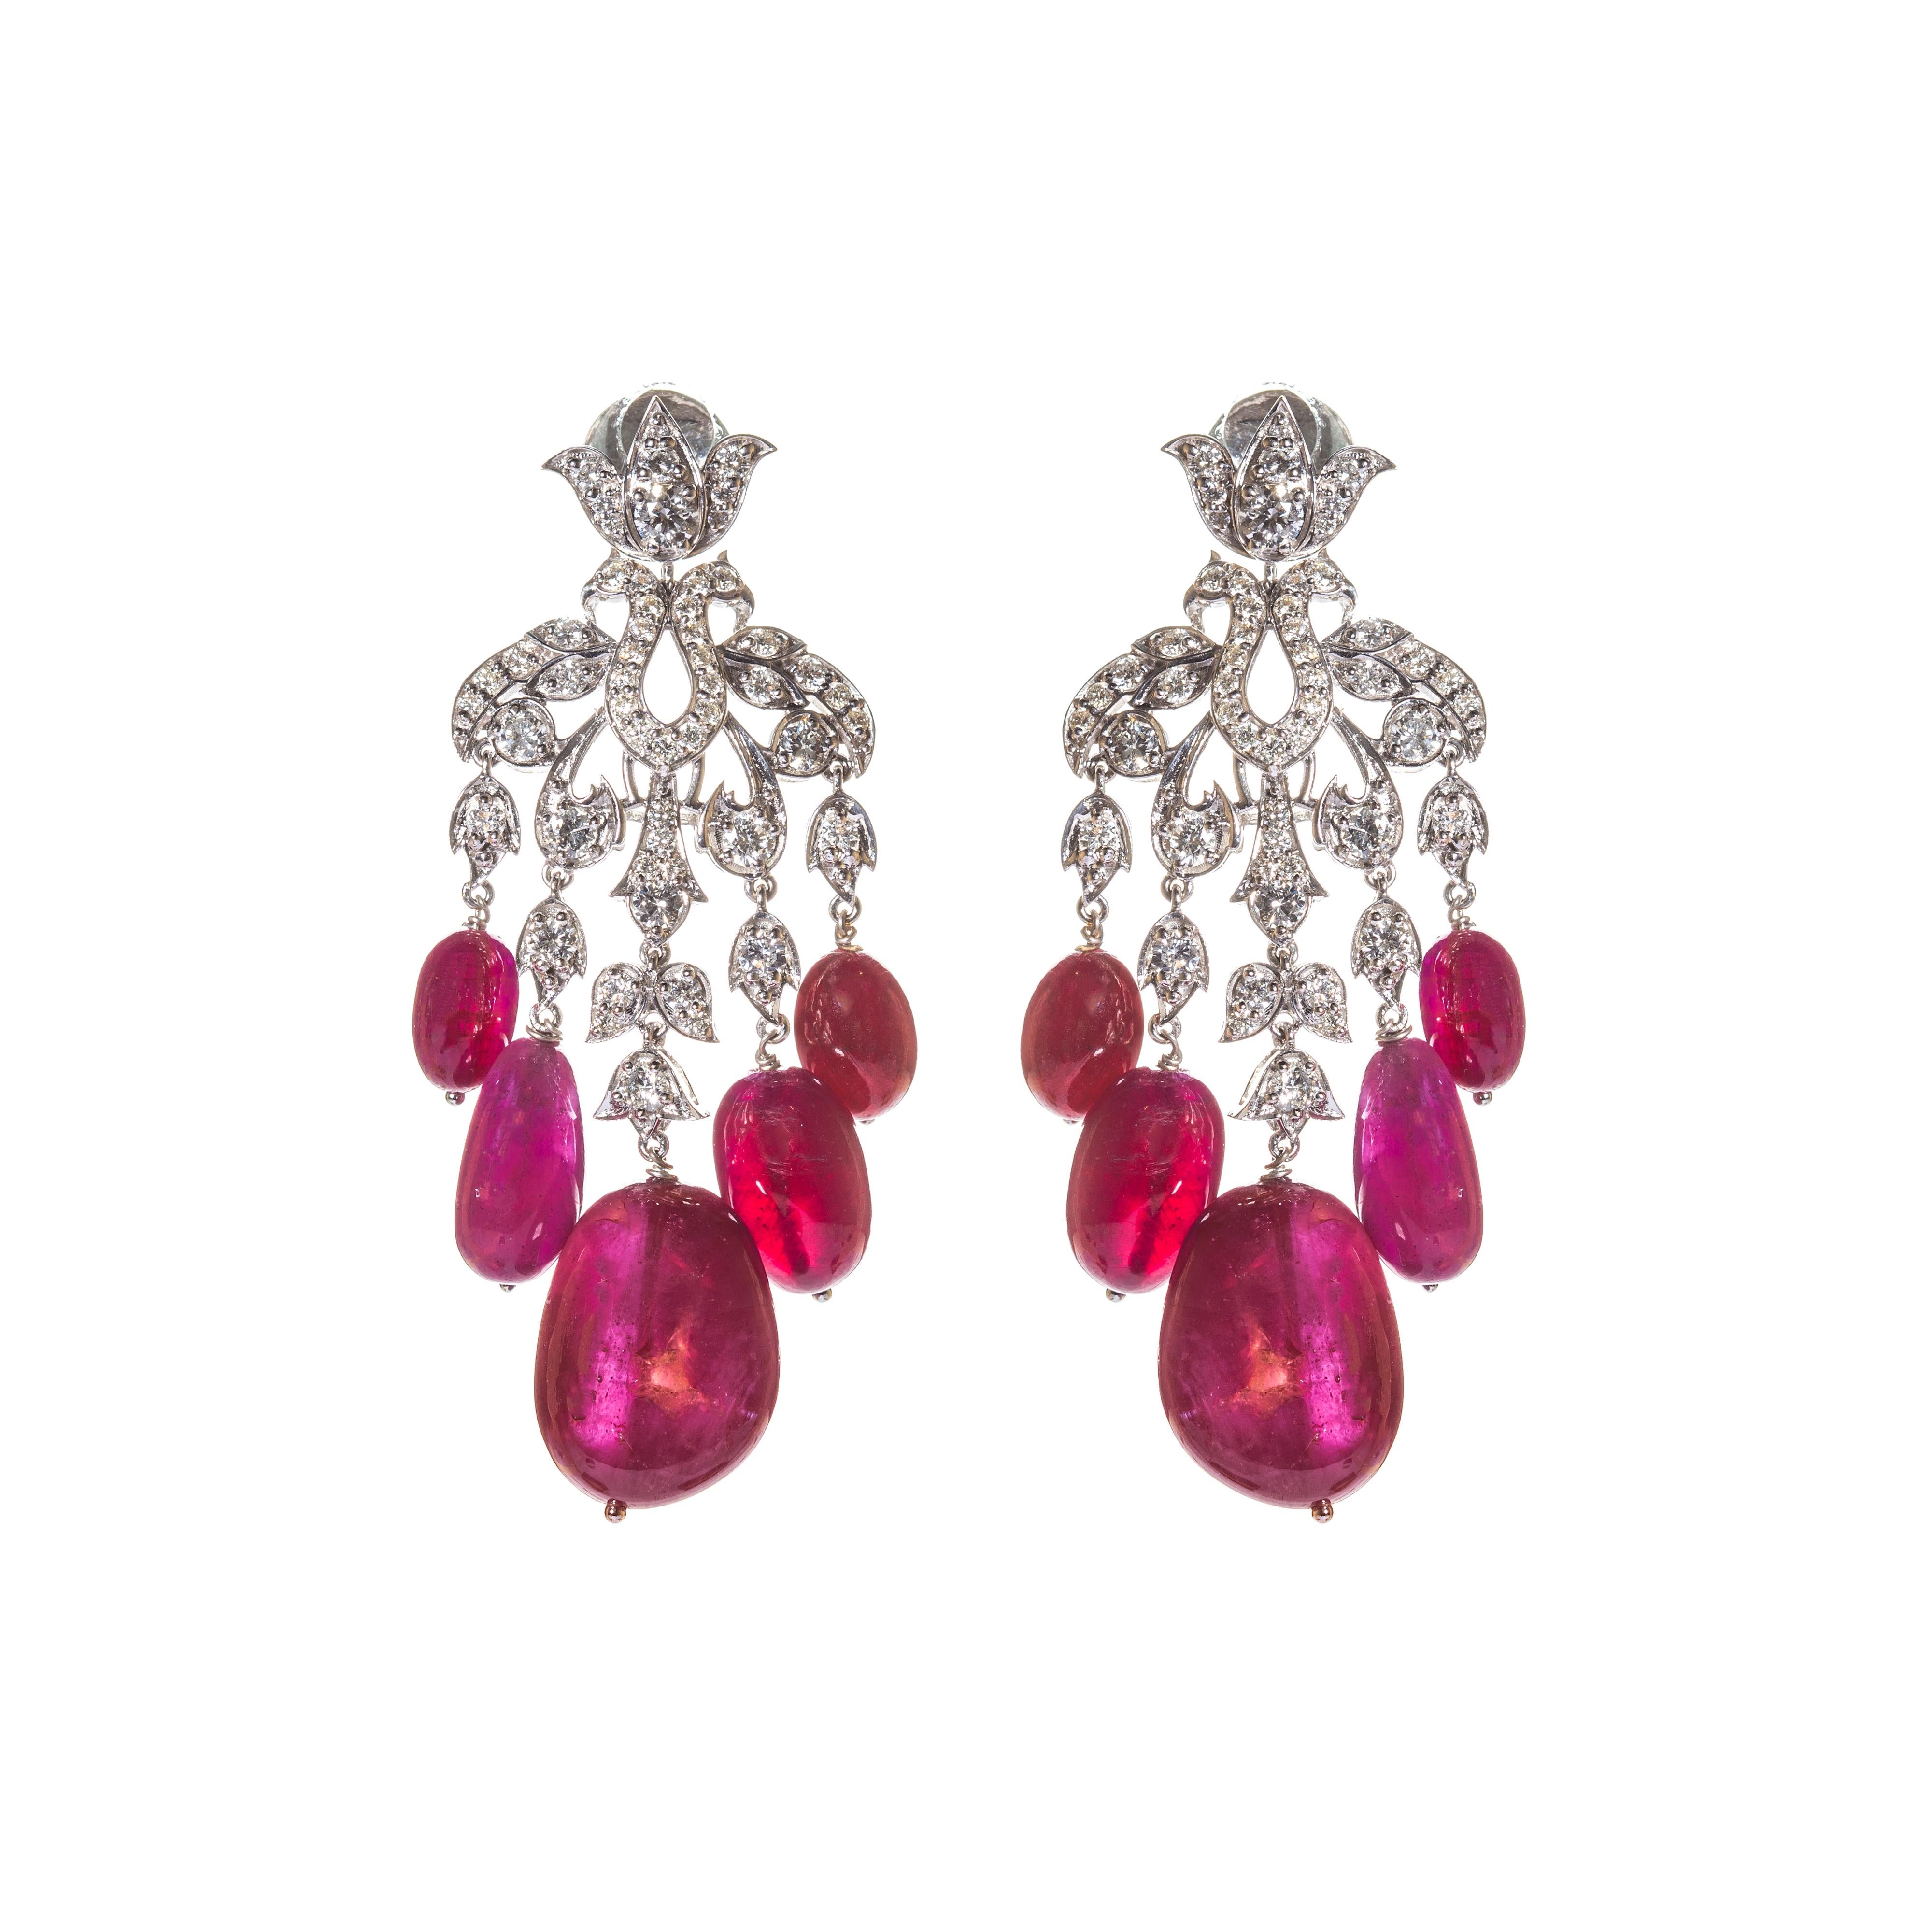 Contemporary 18 Karat Gold Diamond and Ruby Bheruṇḍa Earrings For Sale